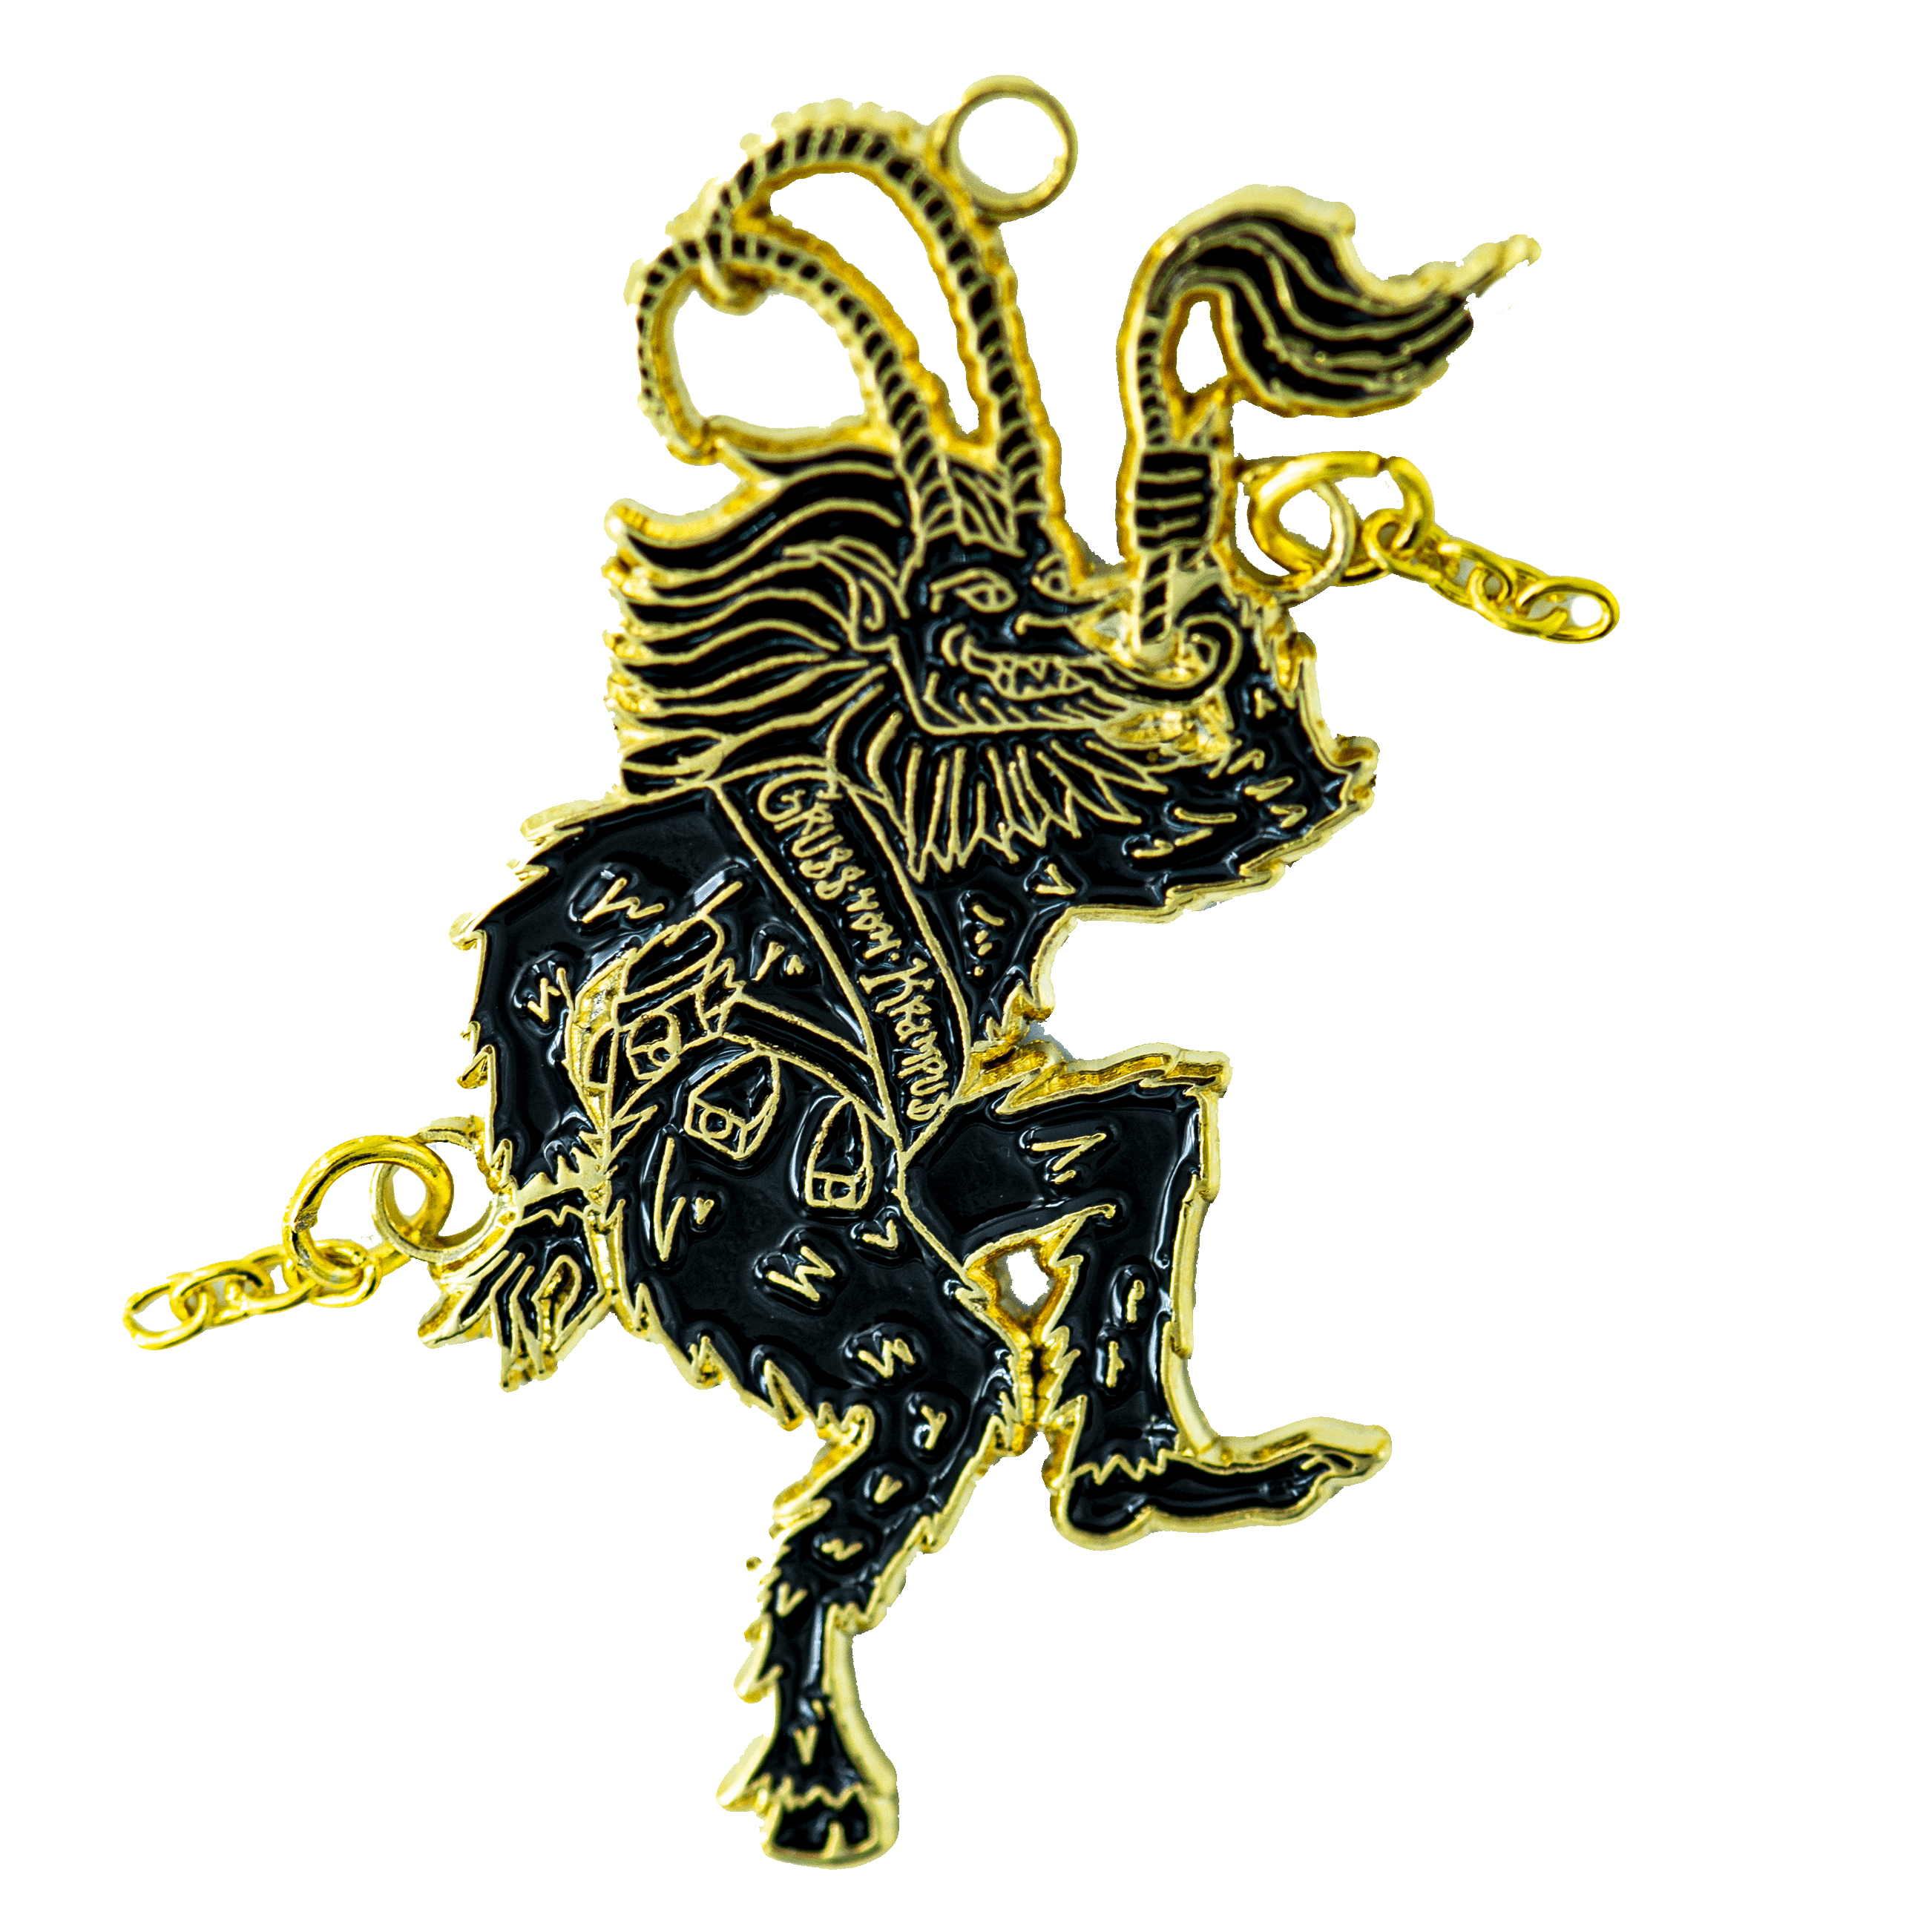 A black and gold ornament of Krampus sticking his tongue out and flailing his chains as he dances. He wears a sash that reads "Gross Vom Krampus". 